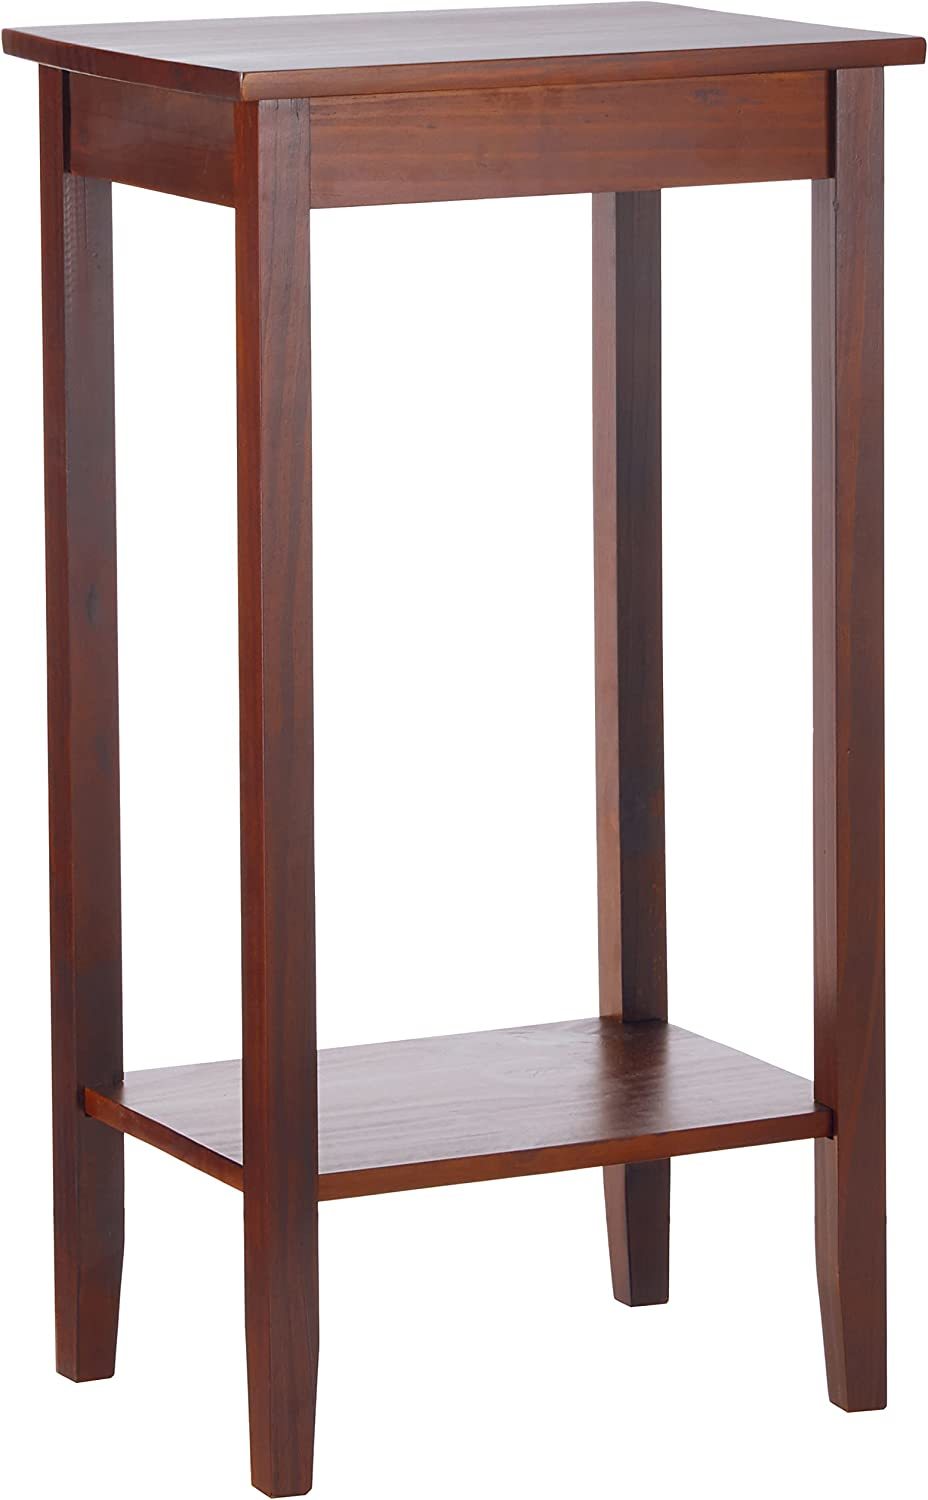 Dhp Rosewood Tall End Table - $78.99